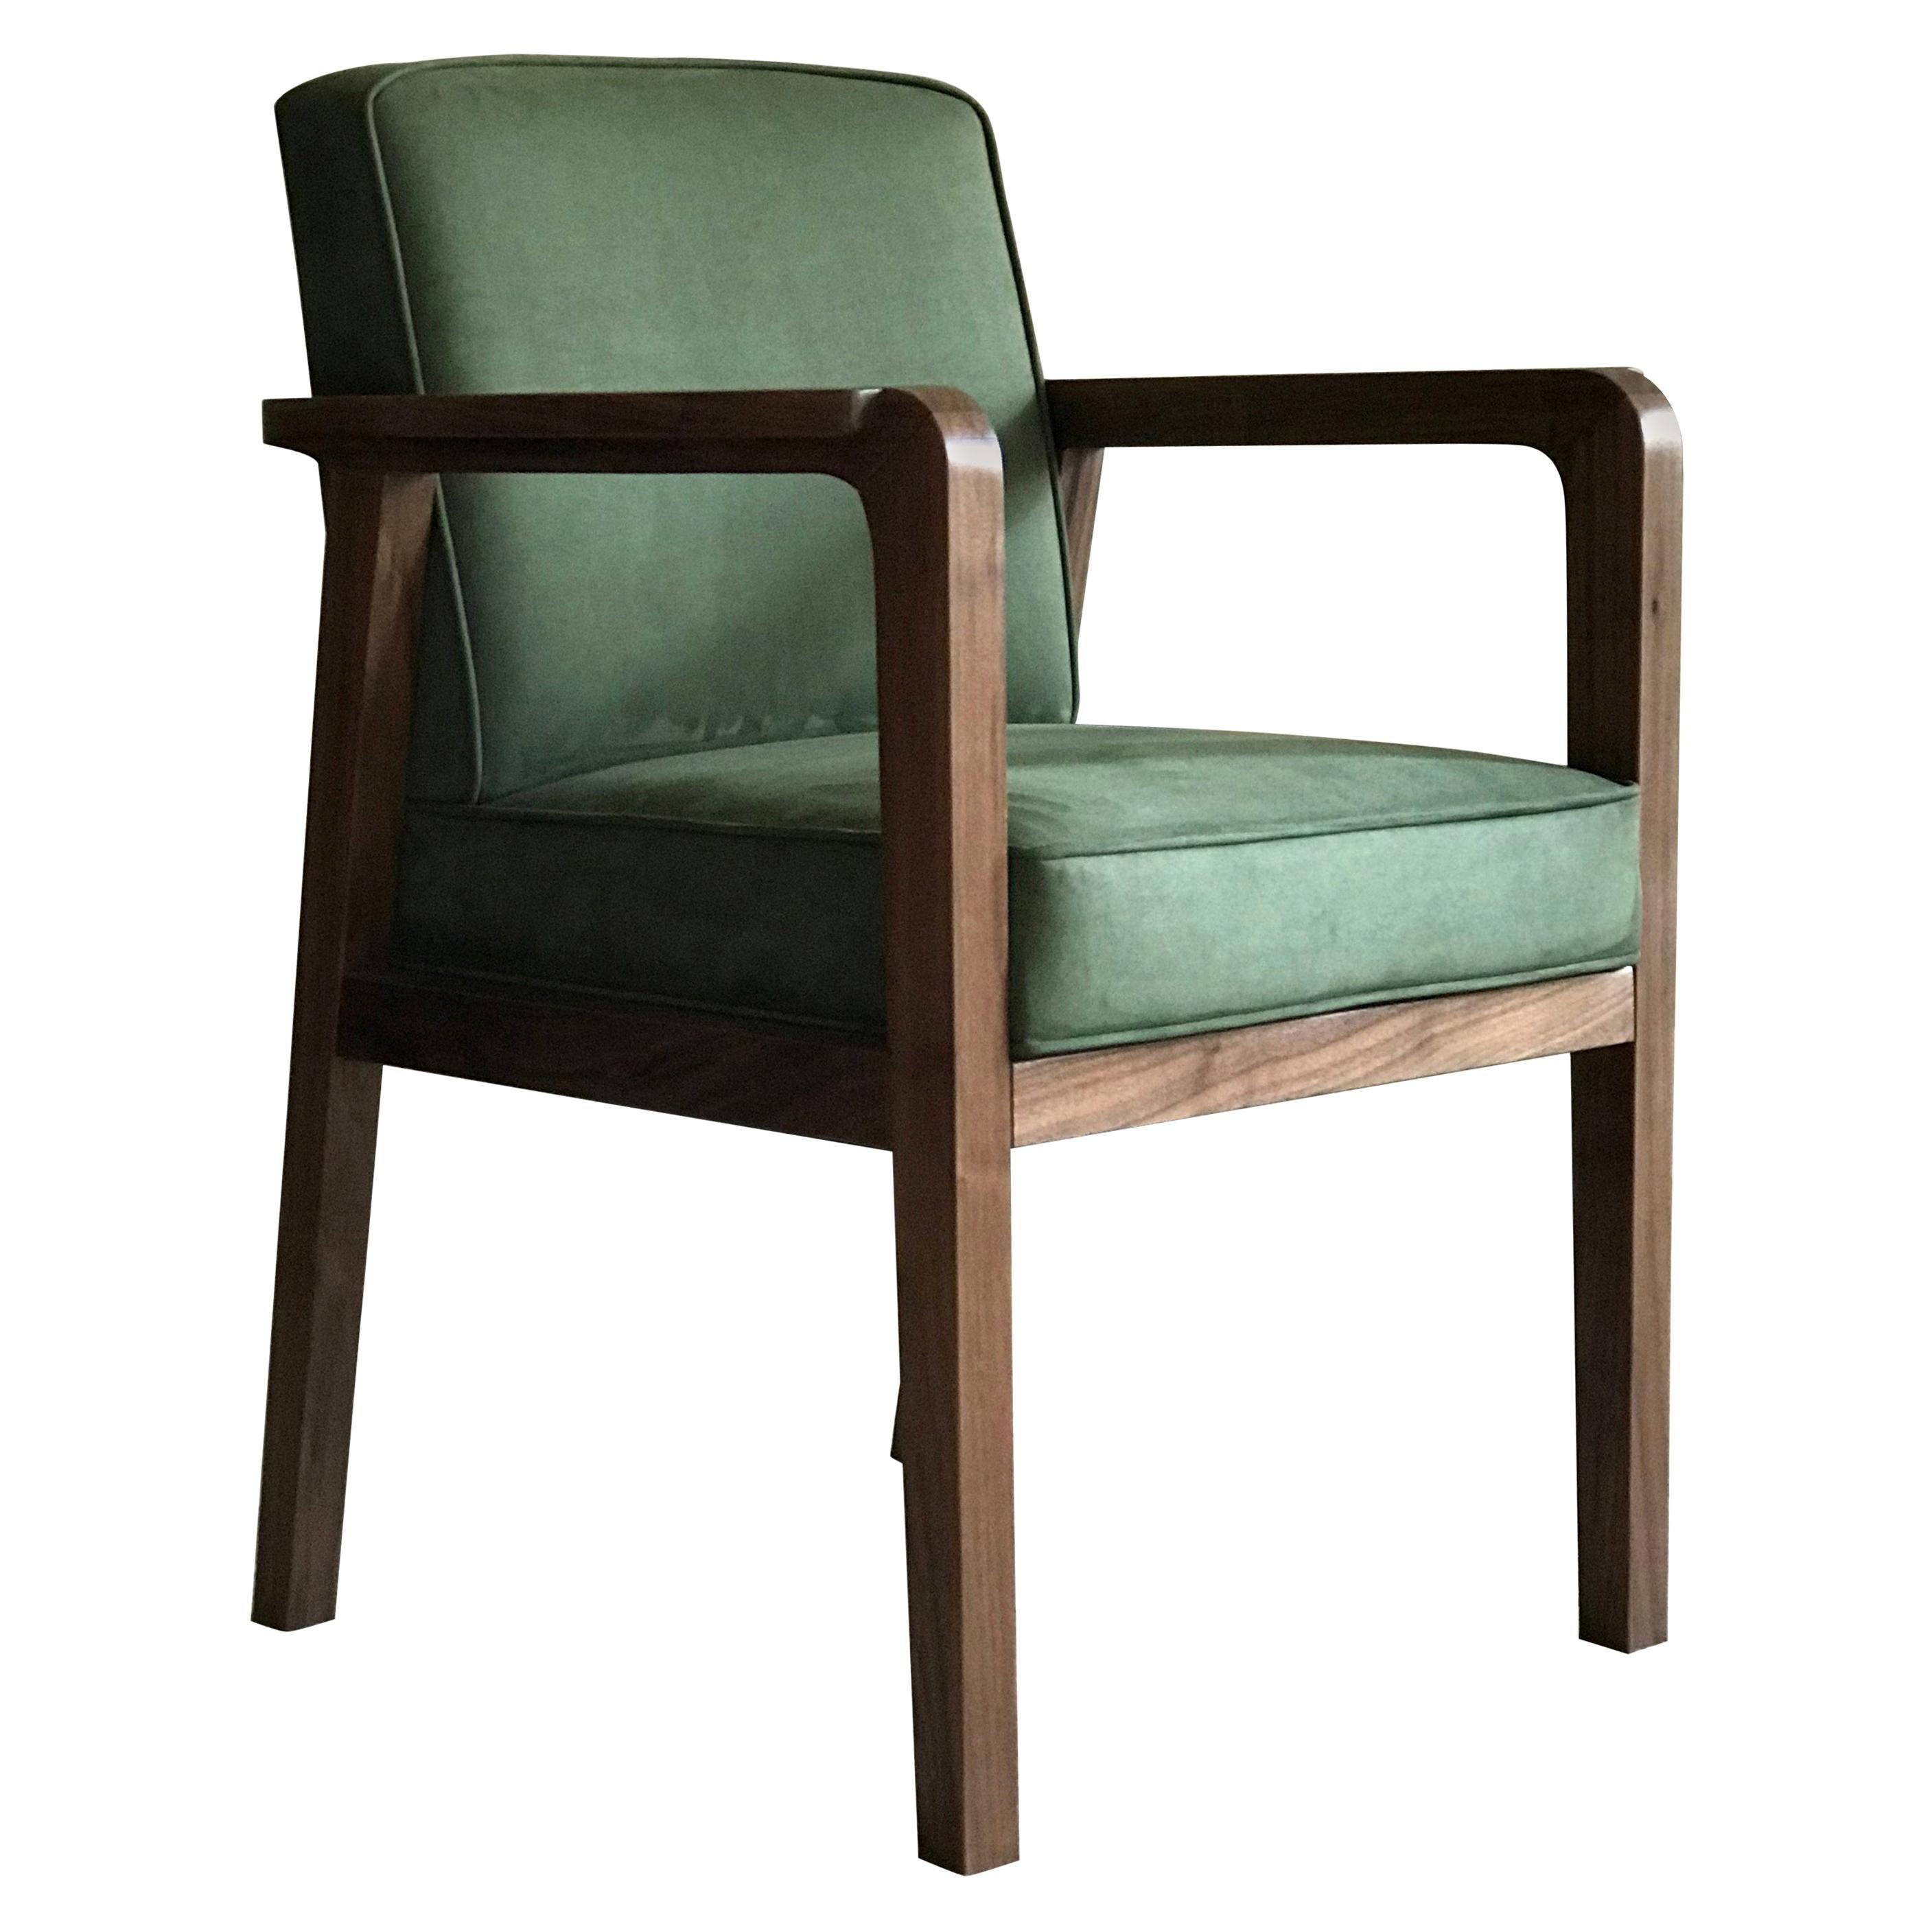 Atena Carver Chair in Black American Walnut Upholstered with Novasuede